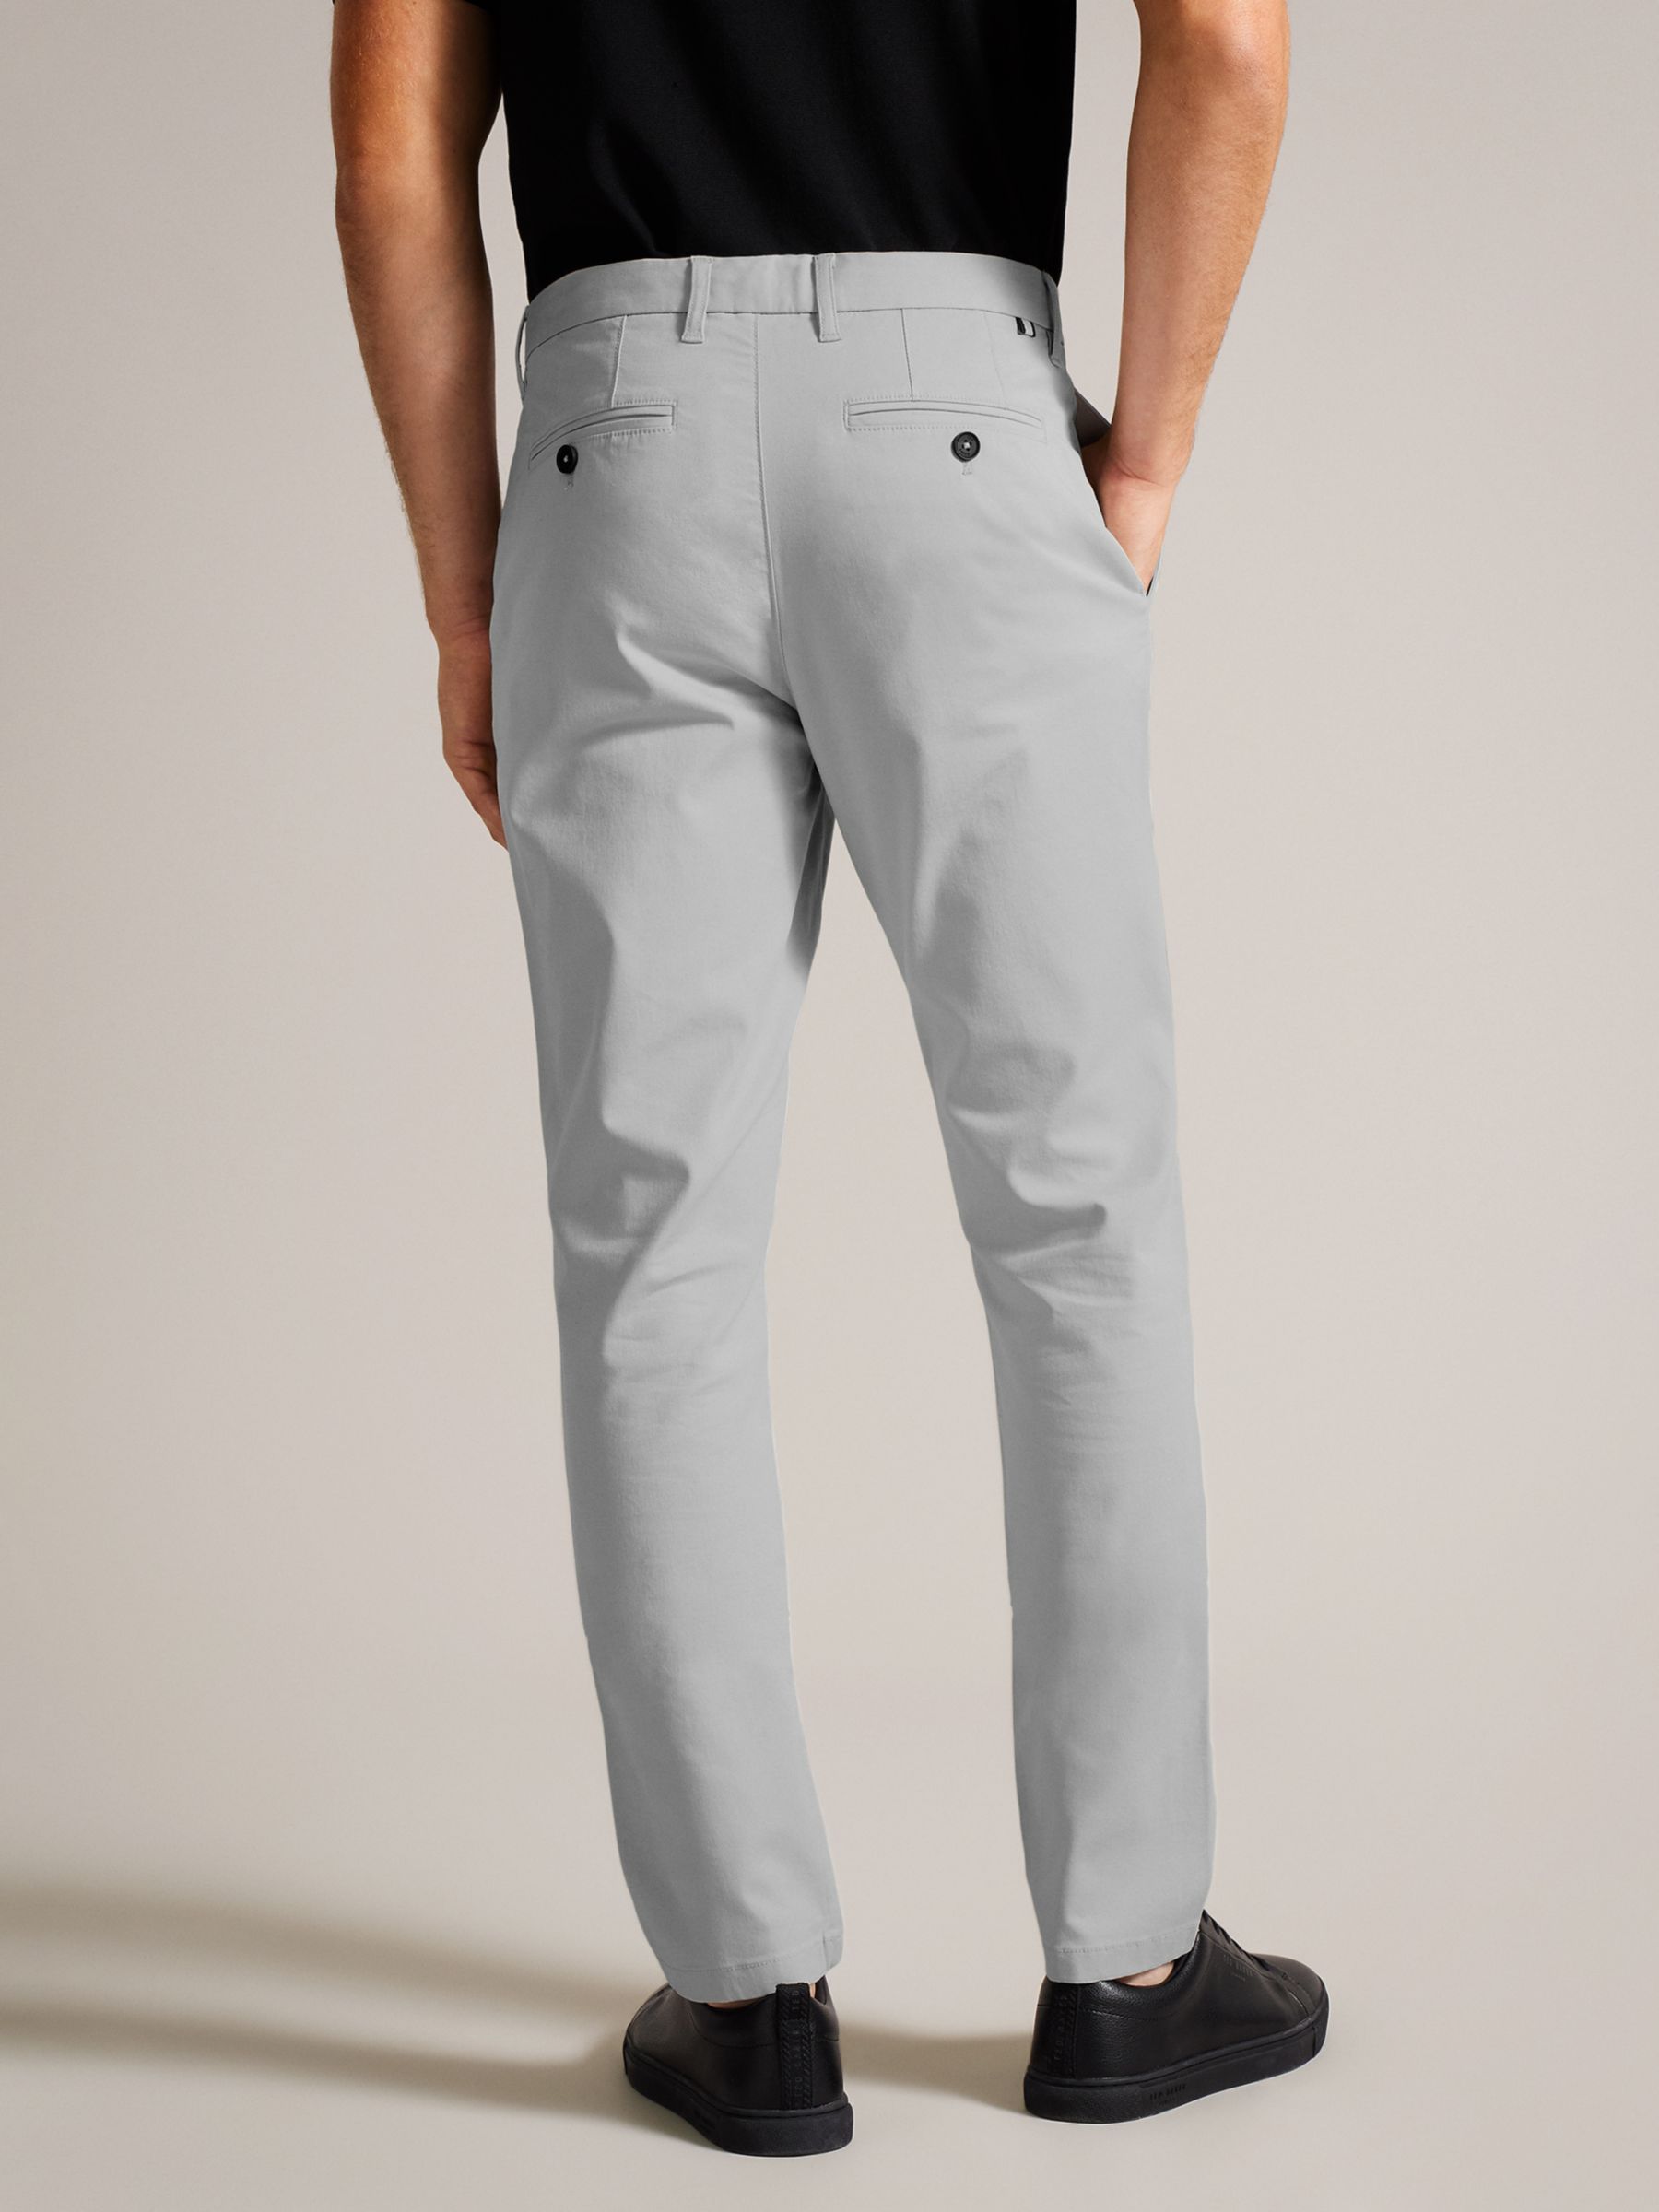 Ted Baker Haydae Slim Fit Textured Chinos, Grey Light, 28R